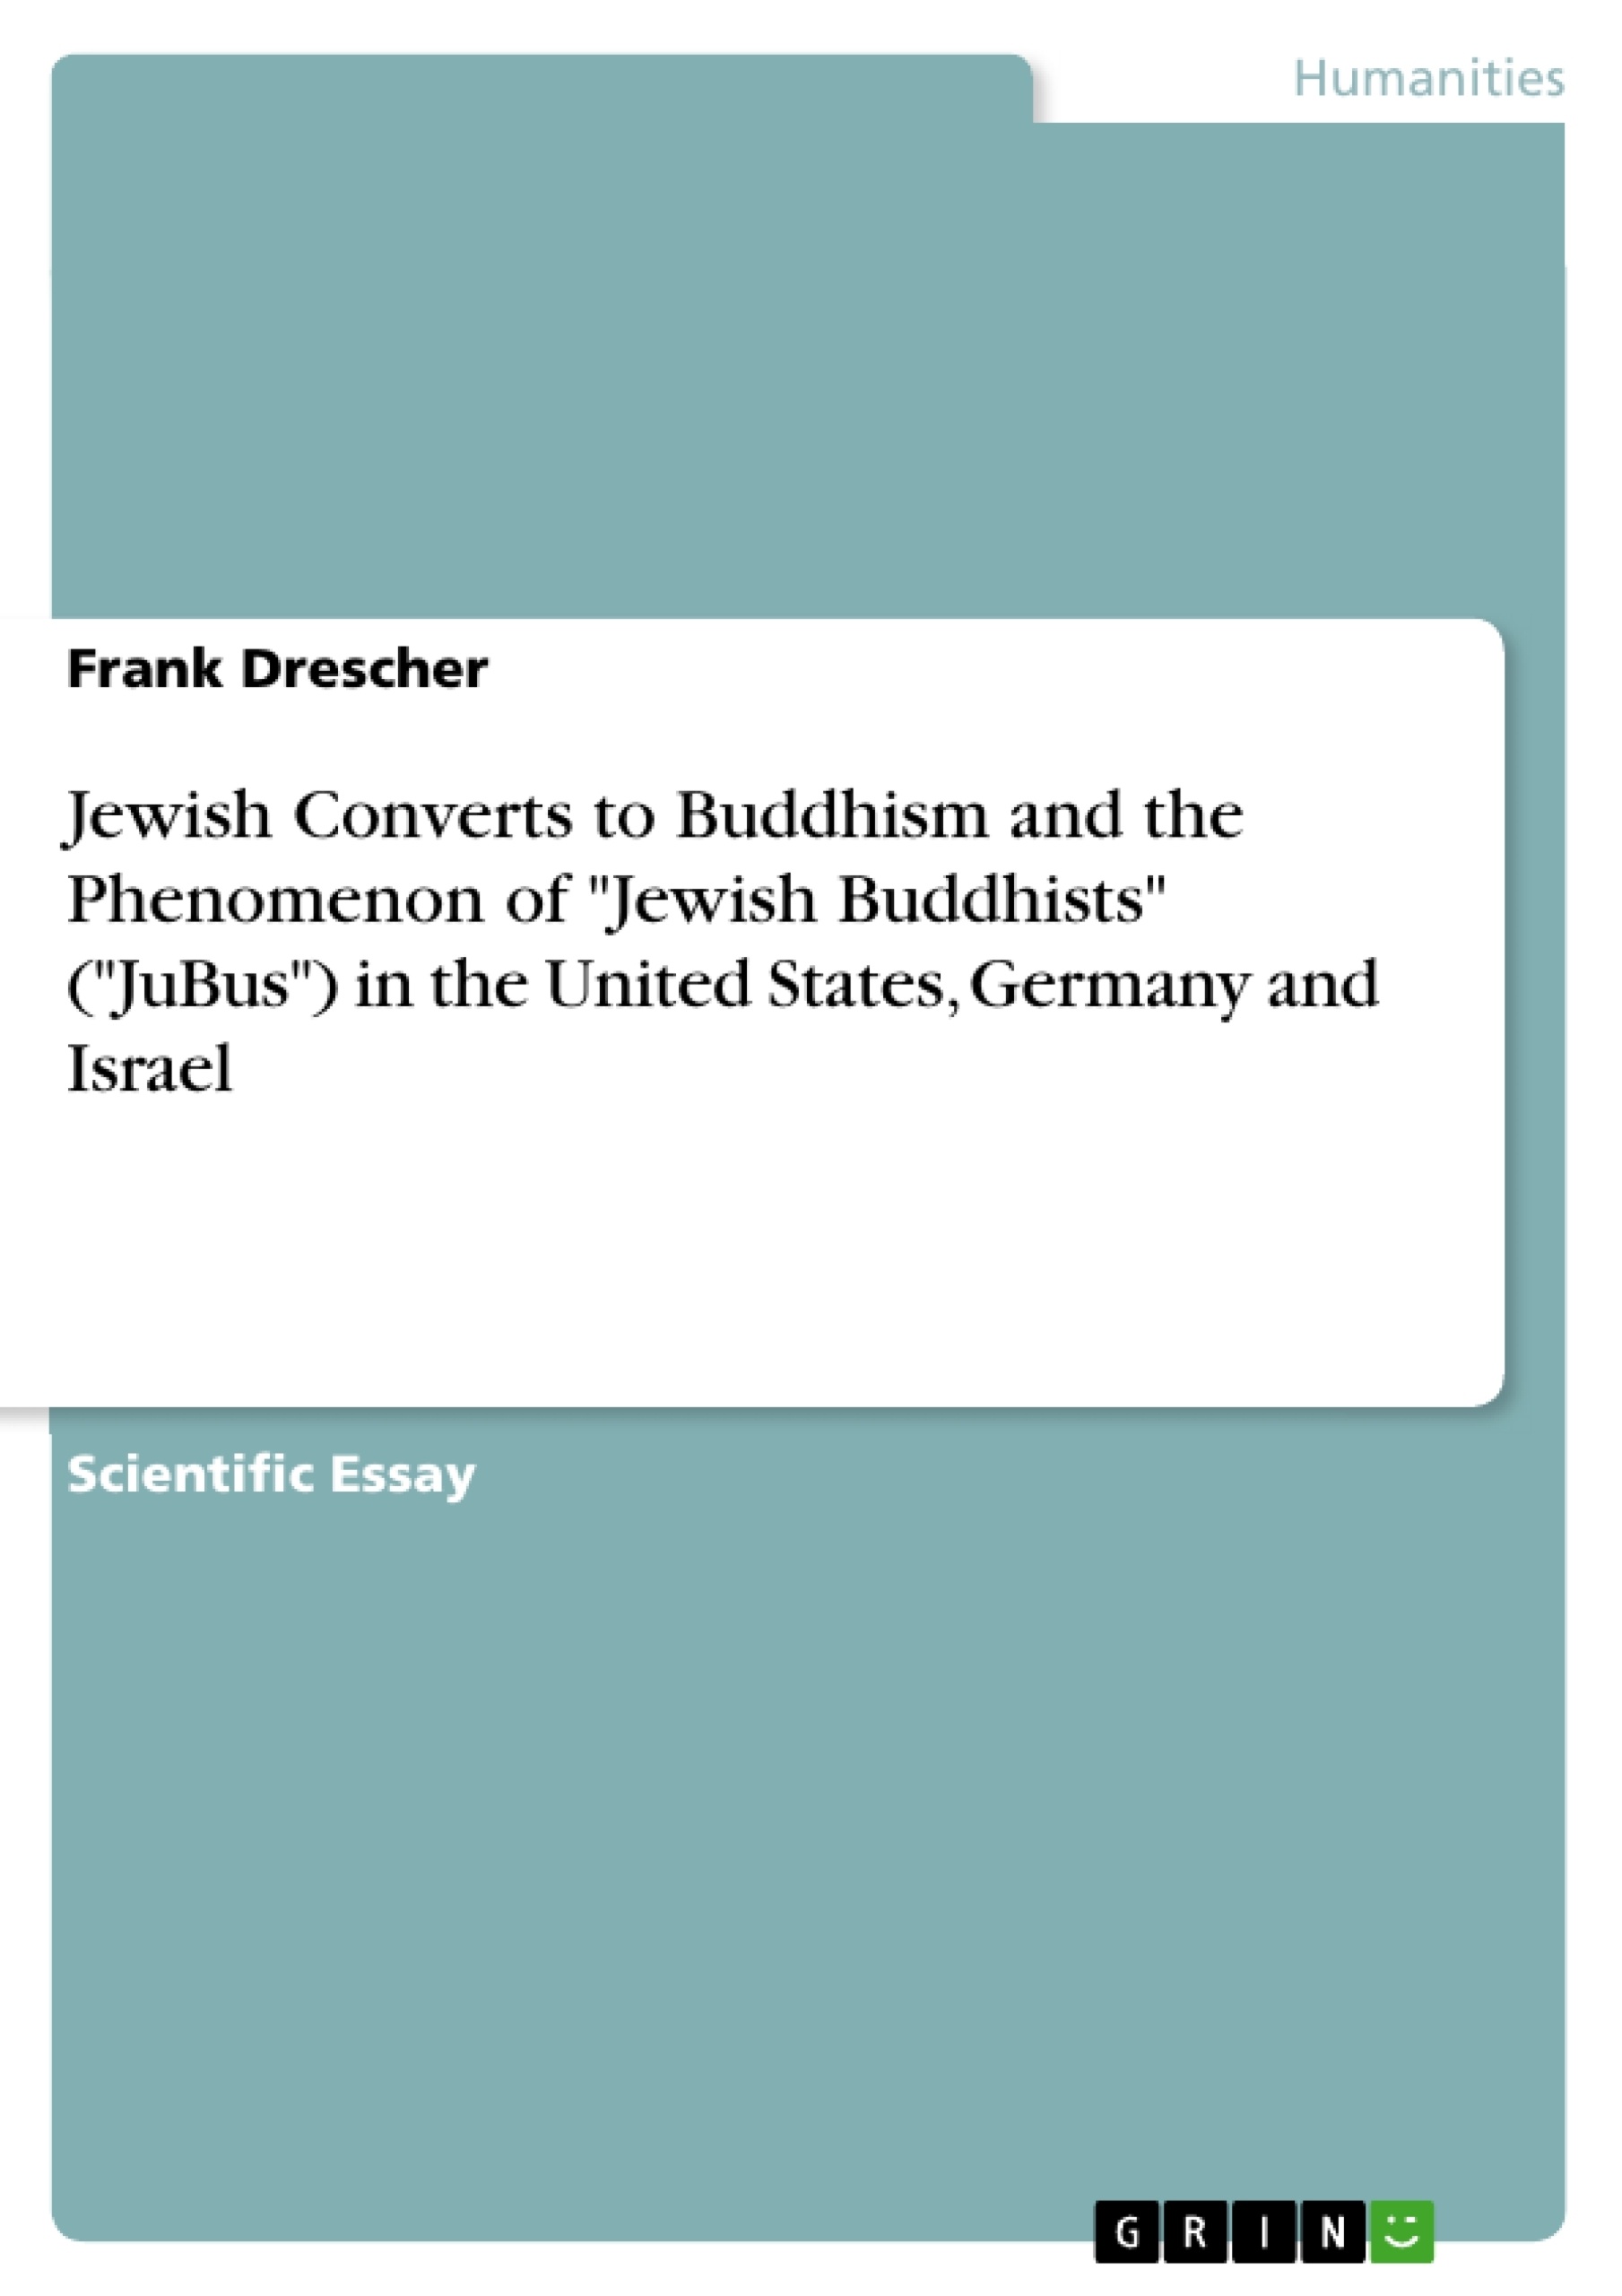 Titre: Jewish Converts to Buddhism and the Phenomenon of "Jewish Buddhists" ("JuBus") in the United States, Germany and Israel